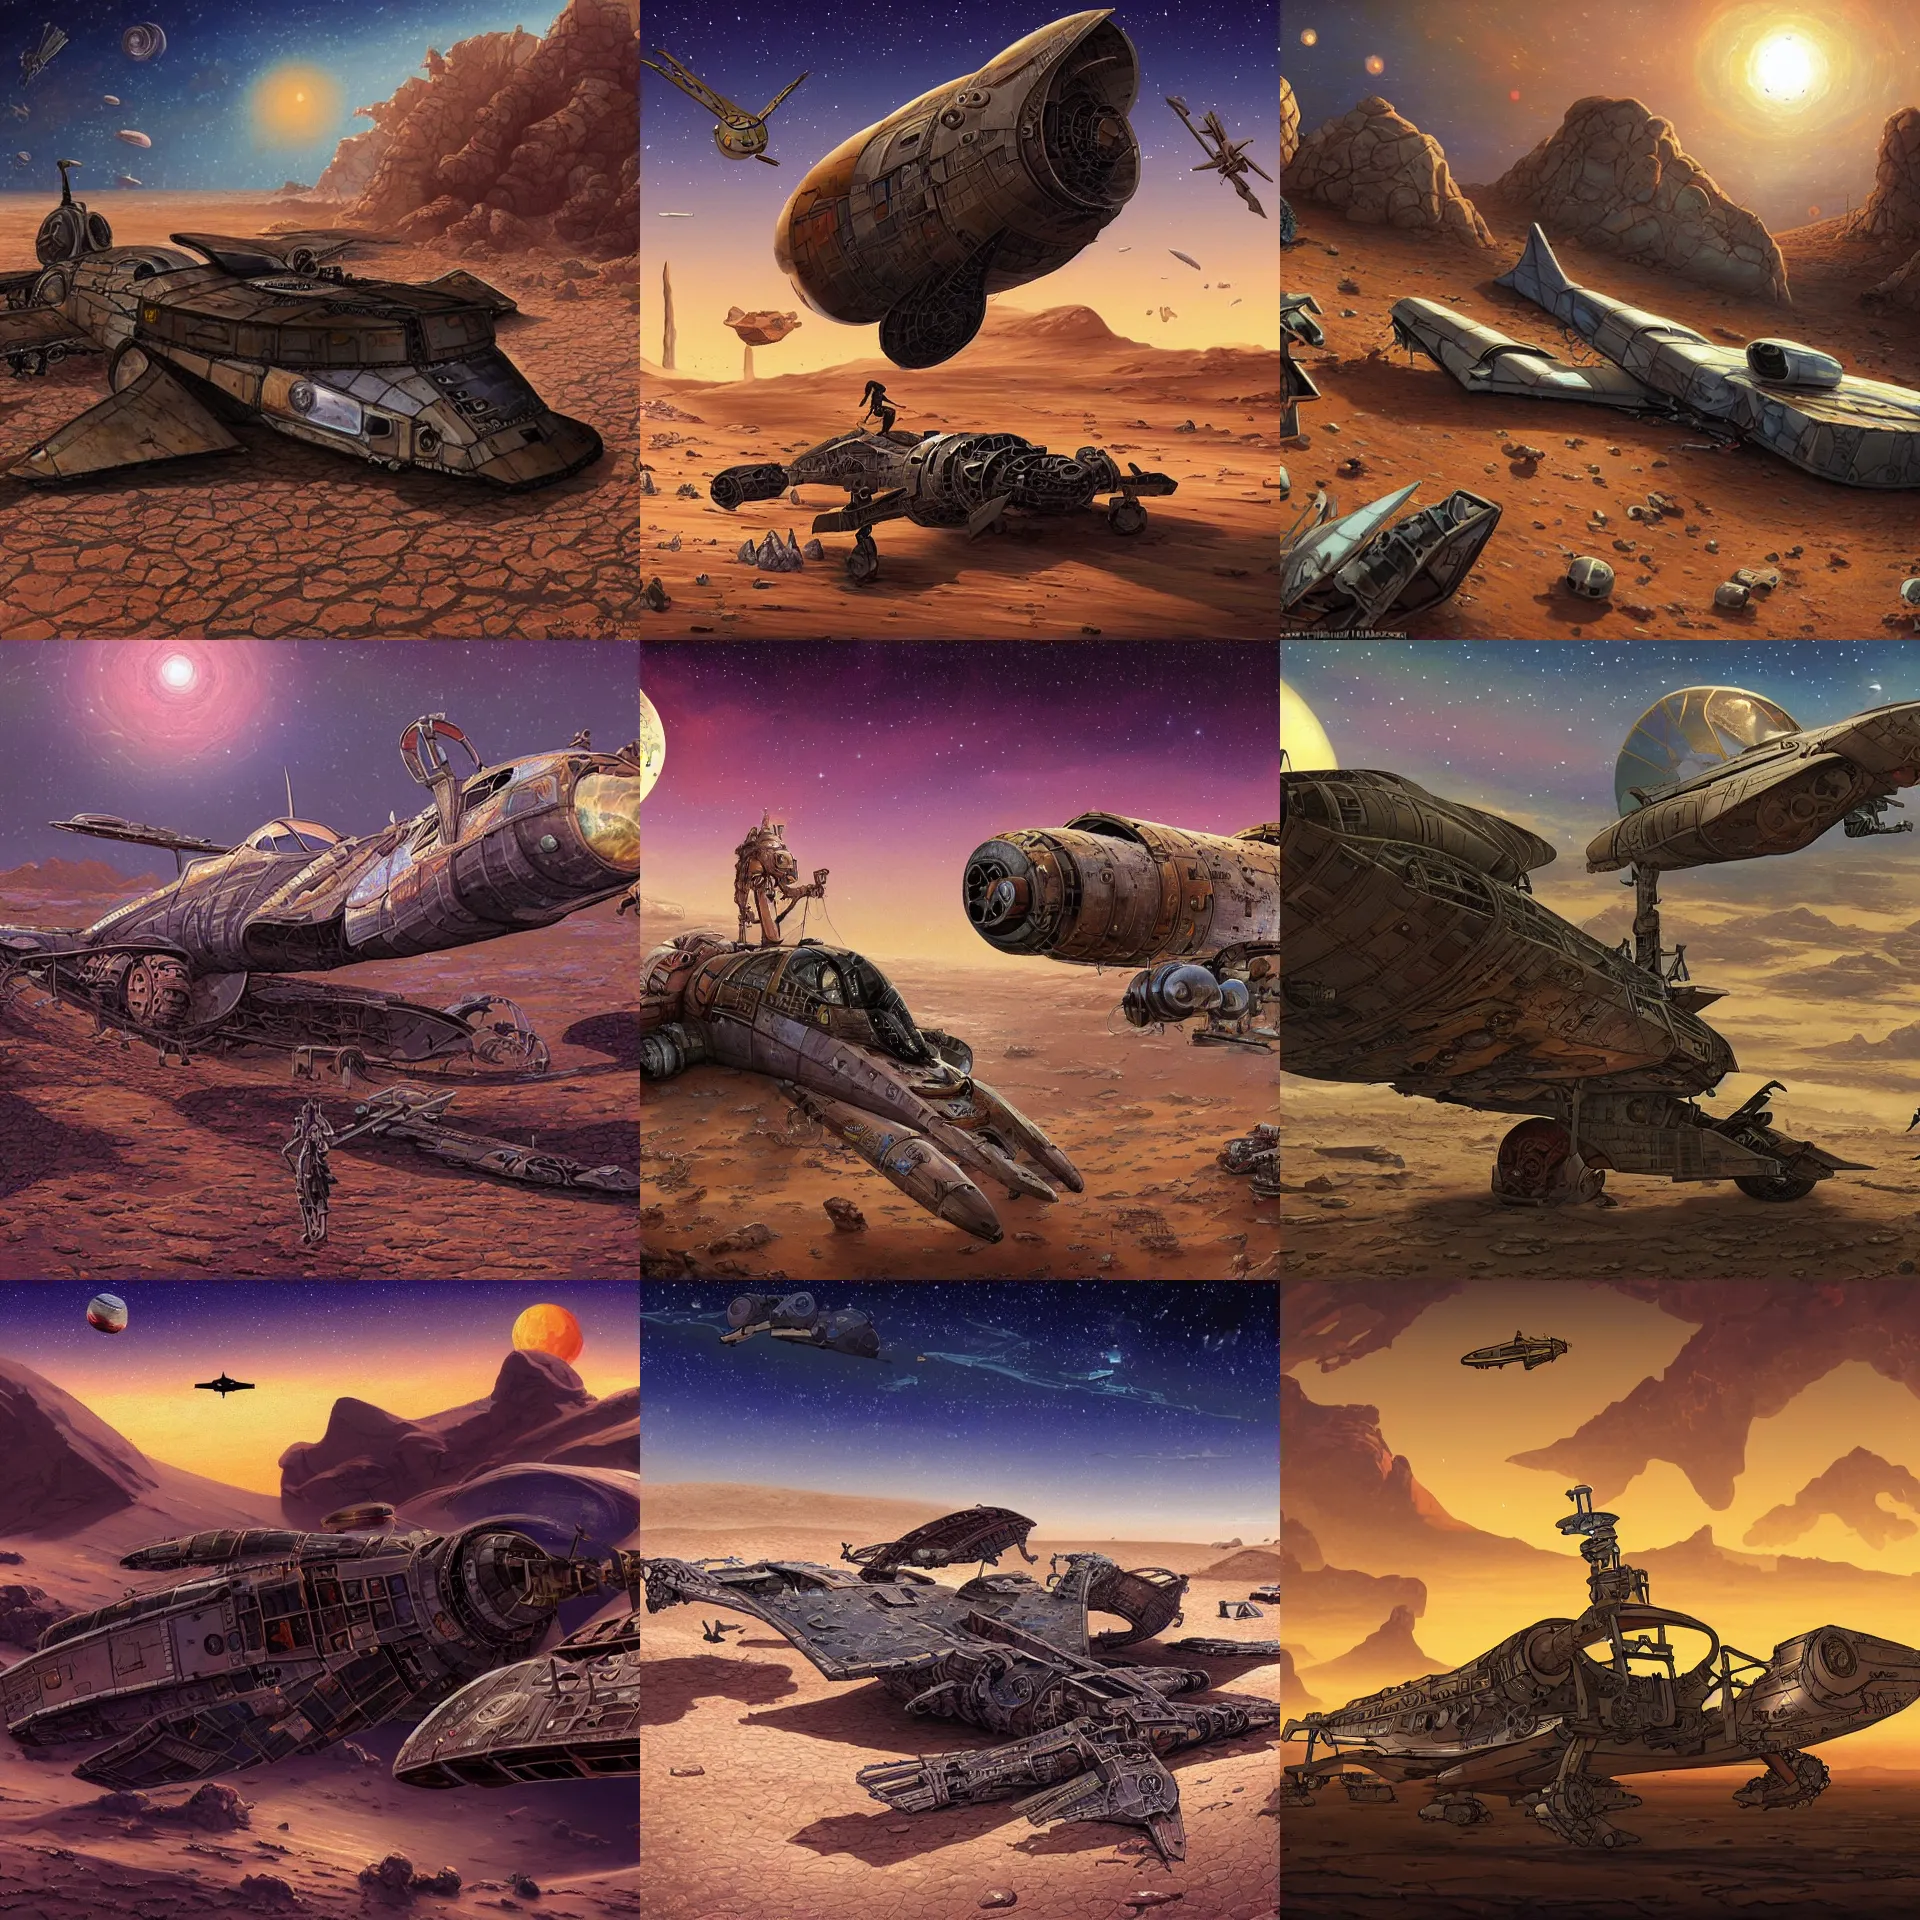 Prompt: in front of a crashed fighter spacecraft on a remote desert planet, from a space themed point and click 2 d graphic adventure game, art inspired by steampunk and thomas kinkade